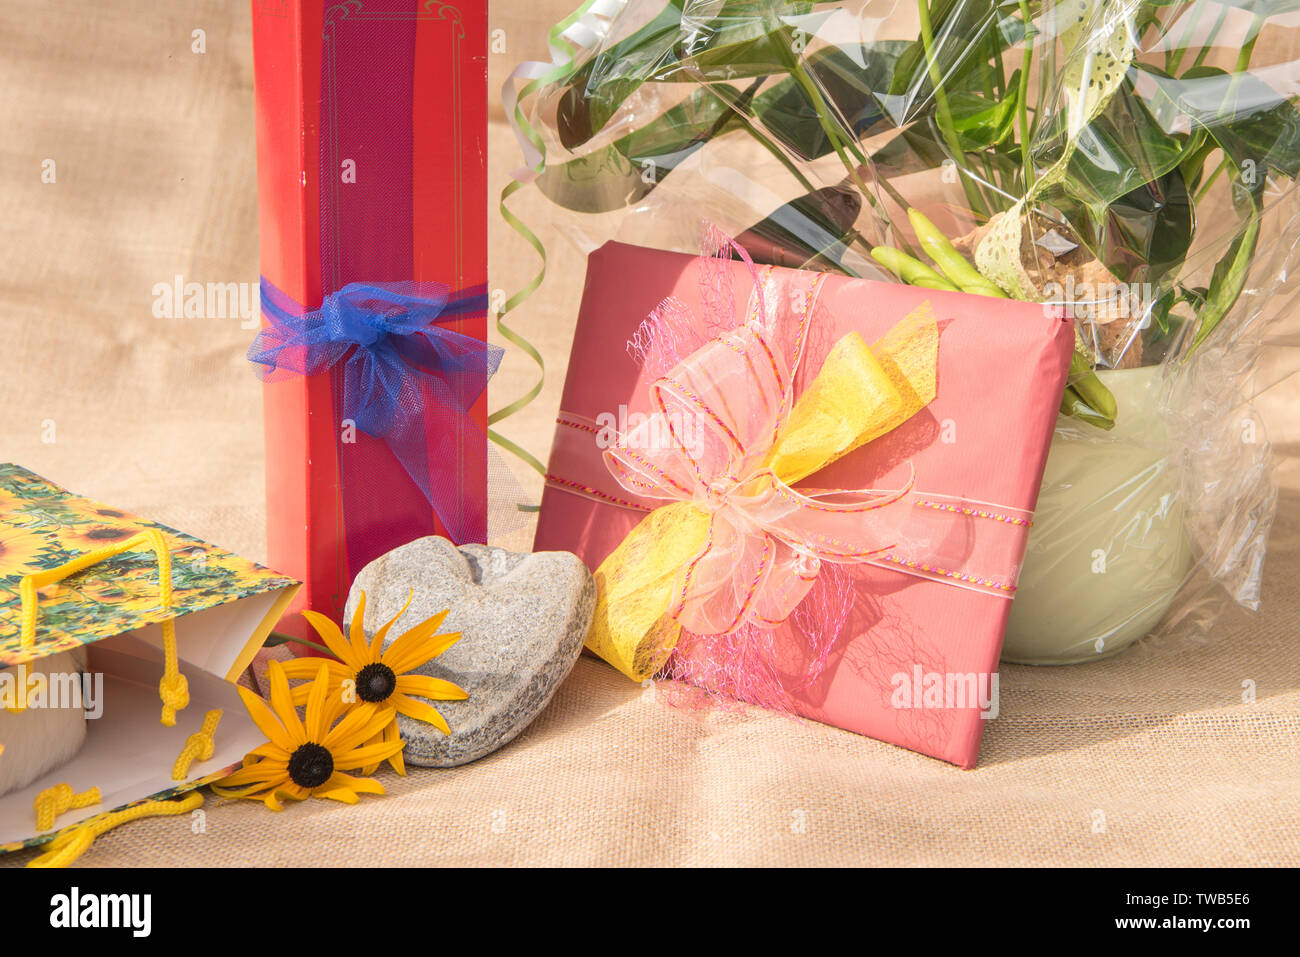 Beautiful packed gifts for different occasions Stock Photo